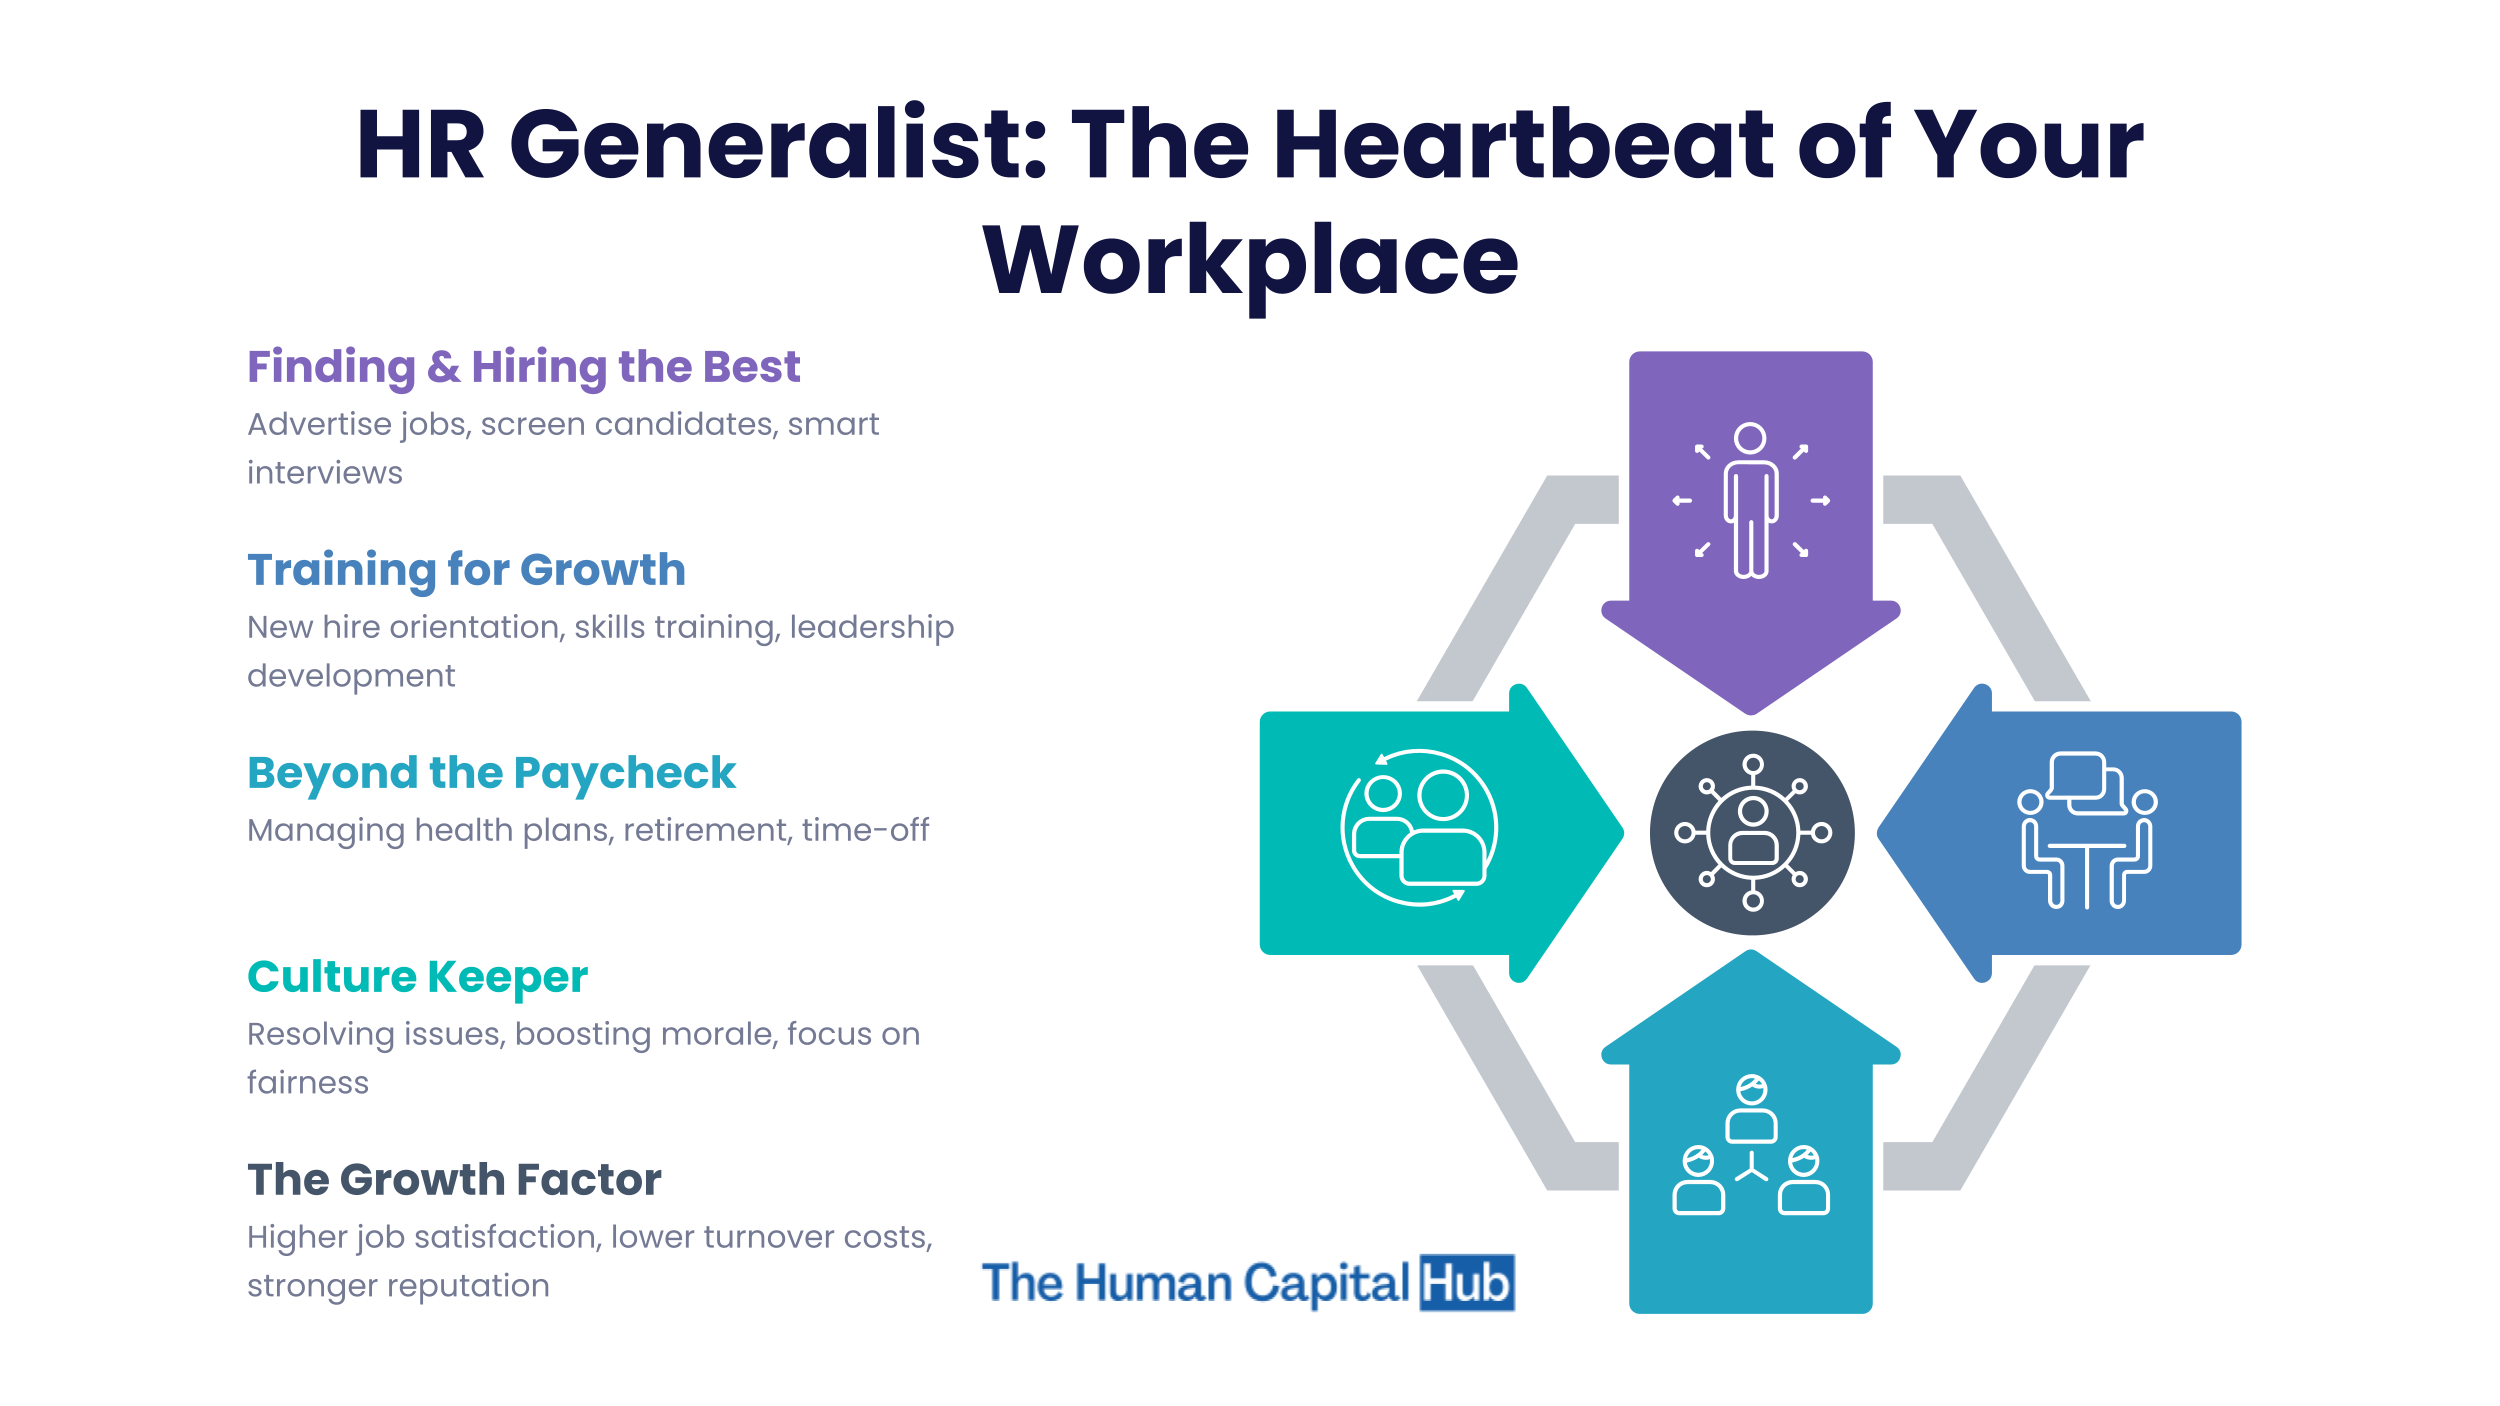 HR Generalist: All You Need To Know About the Role